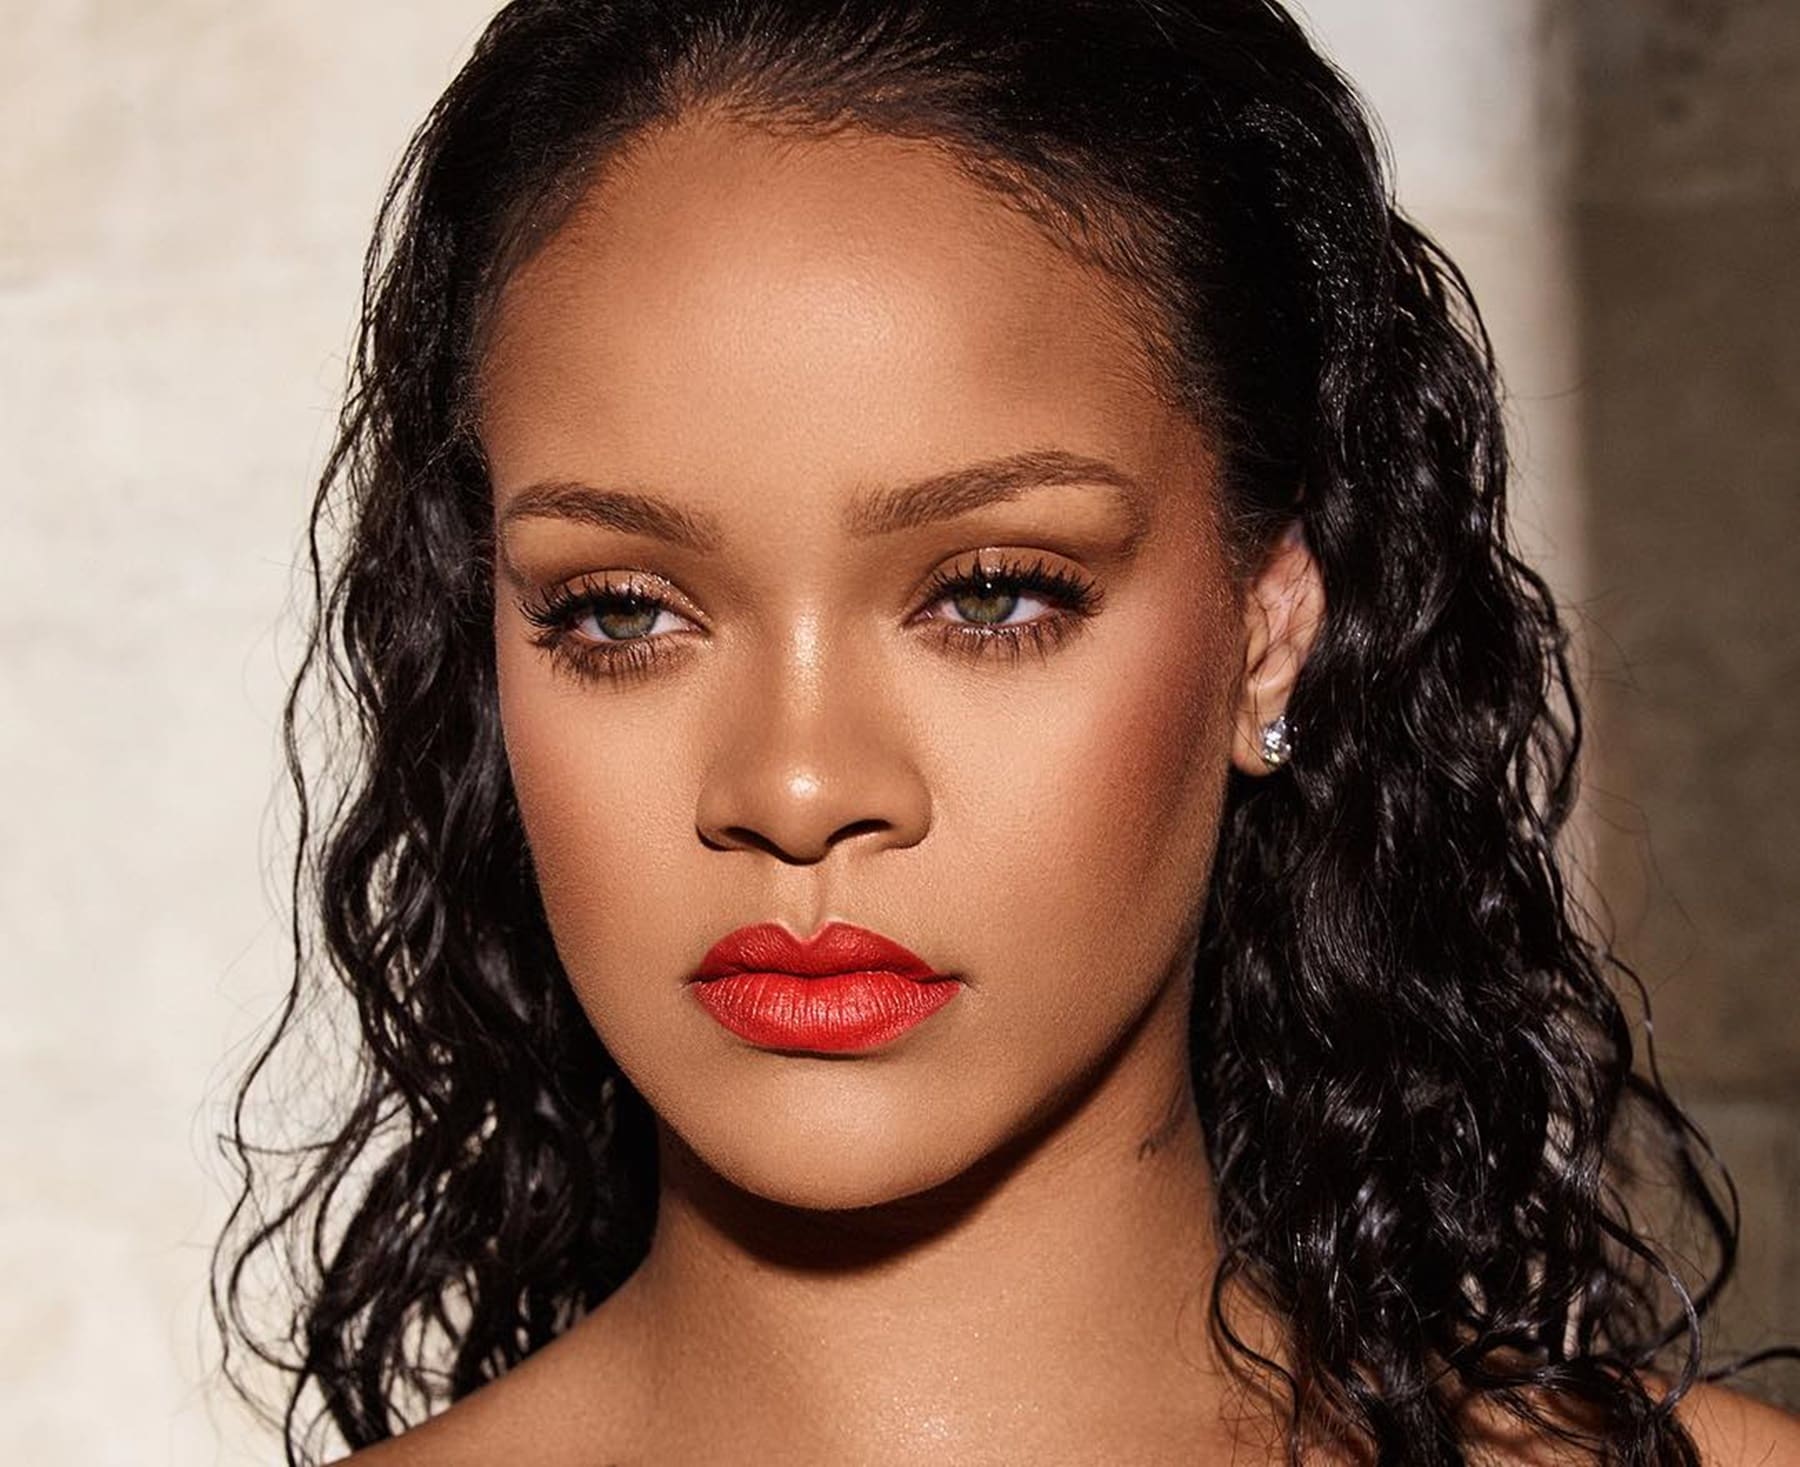 Rihanna Leaves Little To The Imagination In Sizzling New Photos Promoting Lingerie ...1800 x 1467